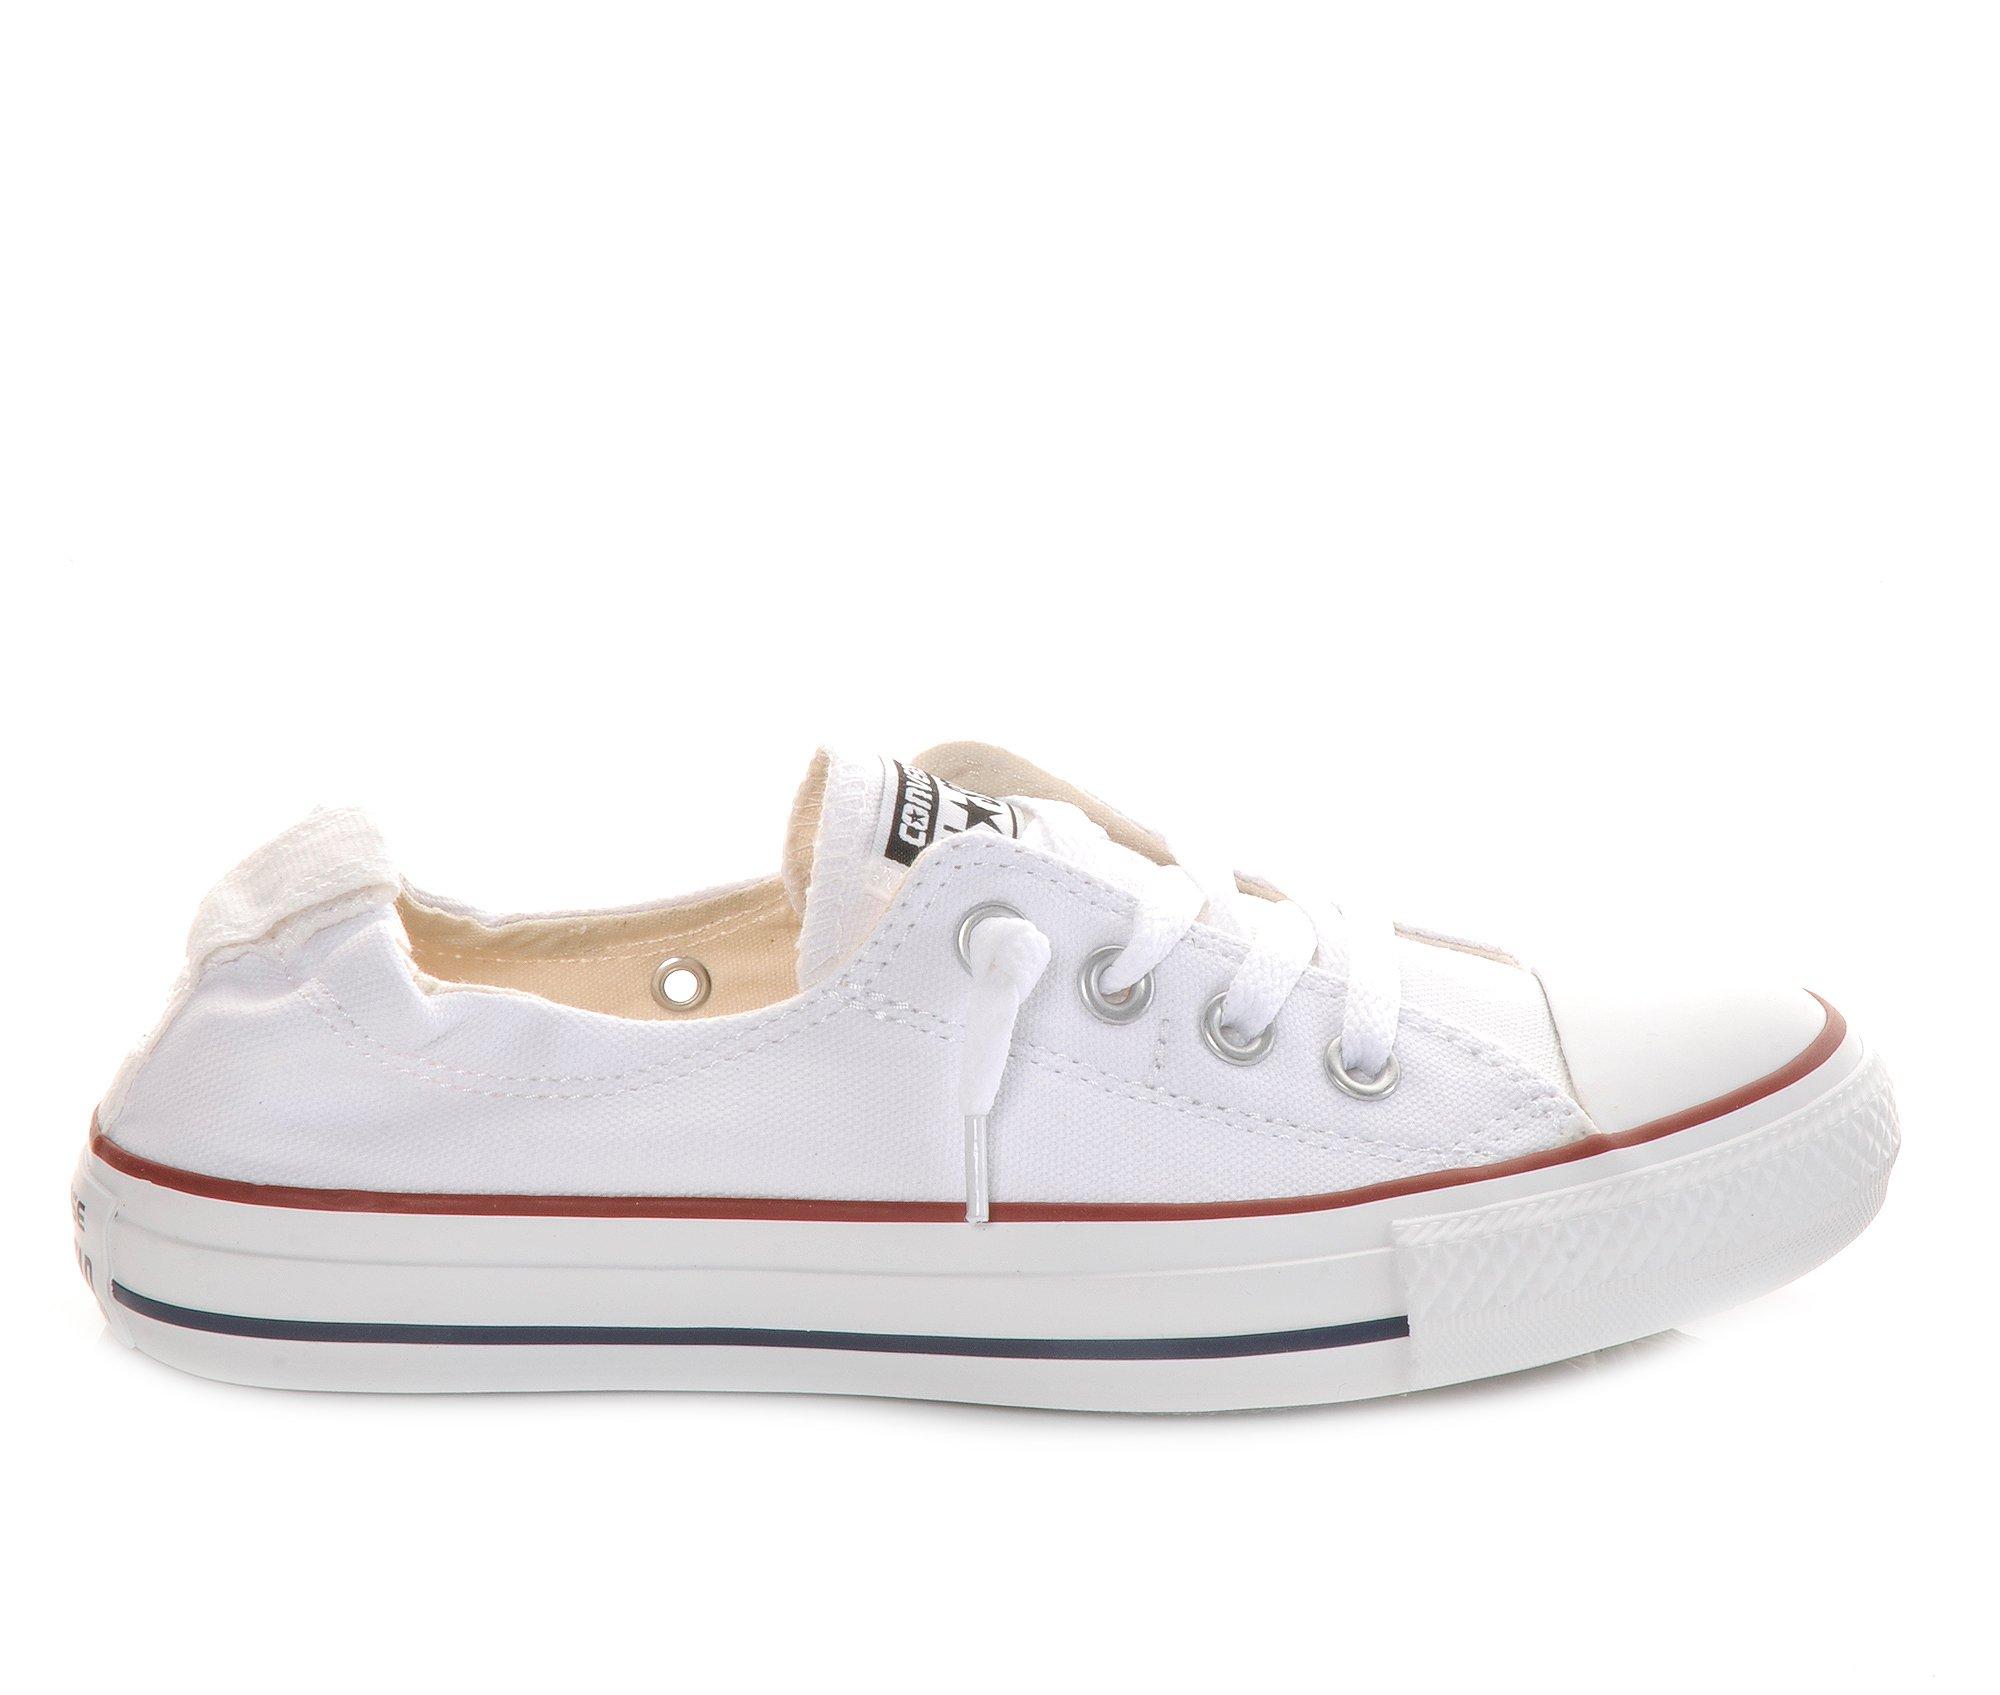 Converse Chuck Taylor All Star Lo Sneaker - Red